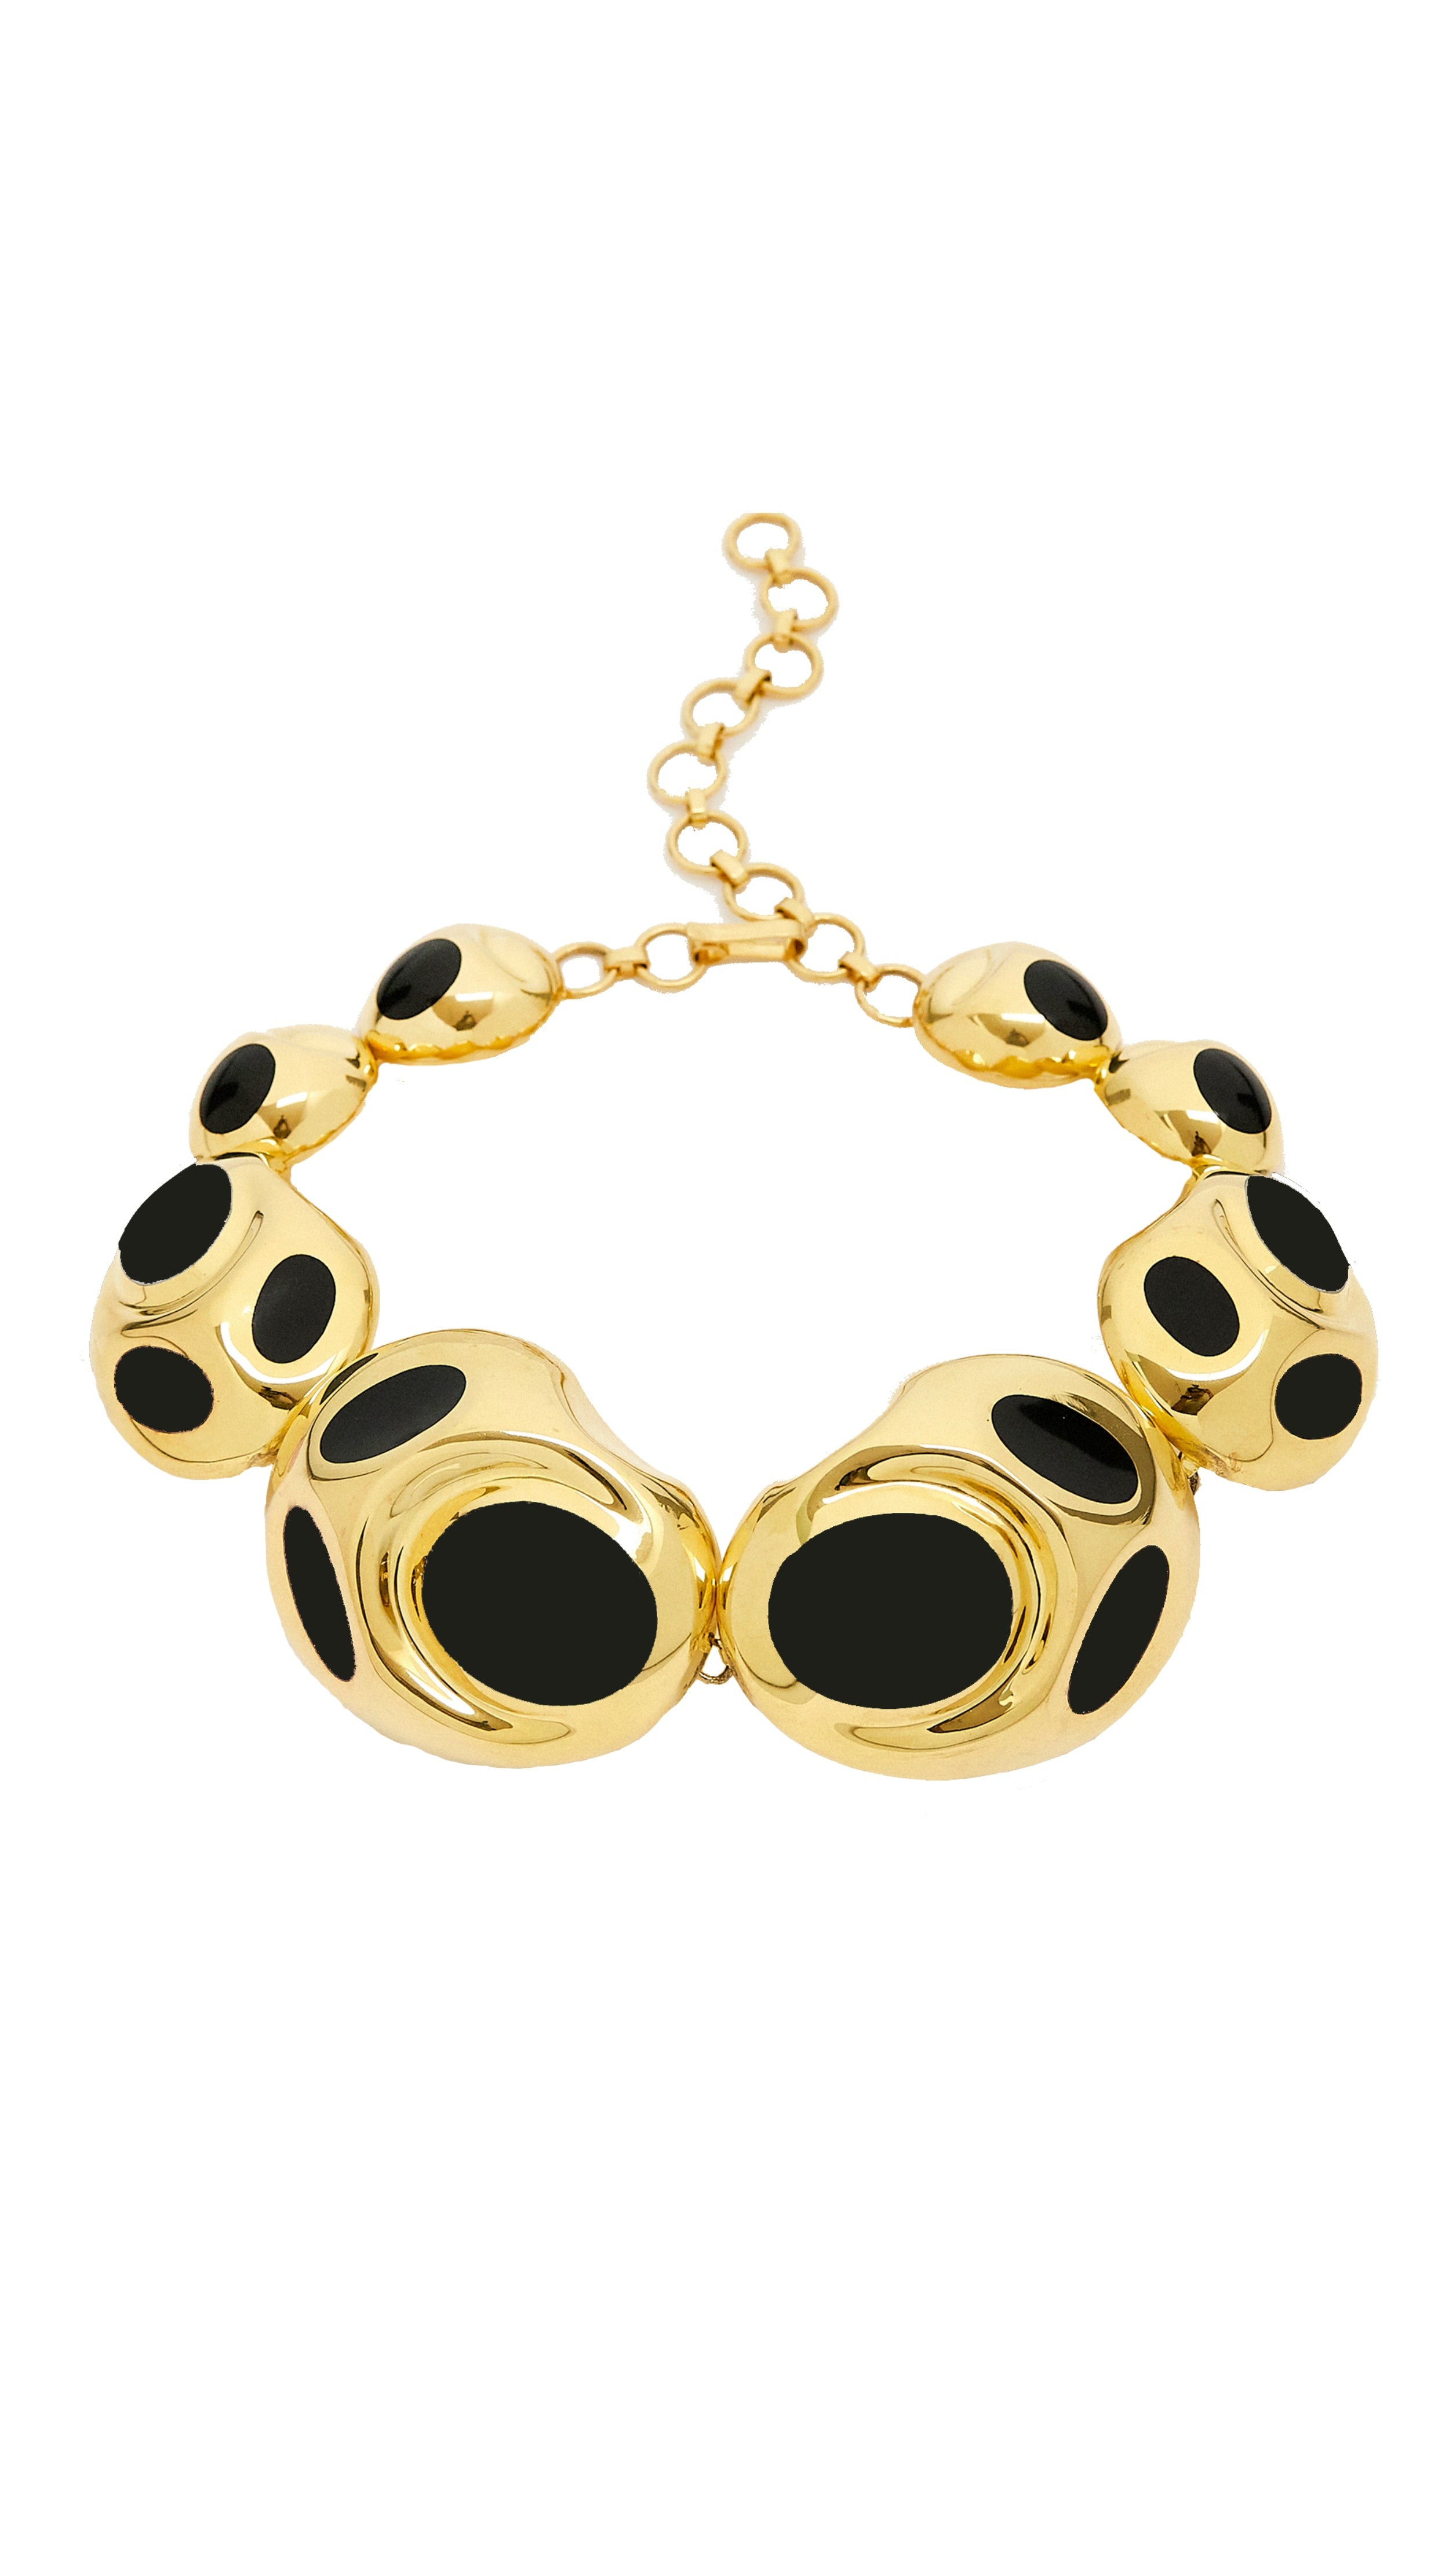 Monica Sordo, Peninsula Choker Necklace in Black Onyx. statement choker is made with organically shaped 24 carat gold plated ovoids and black onyx inlay. Adjustable length. Photo of the product shown from the front.